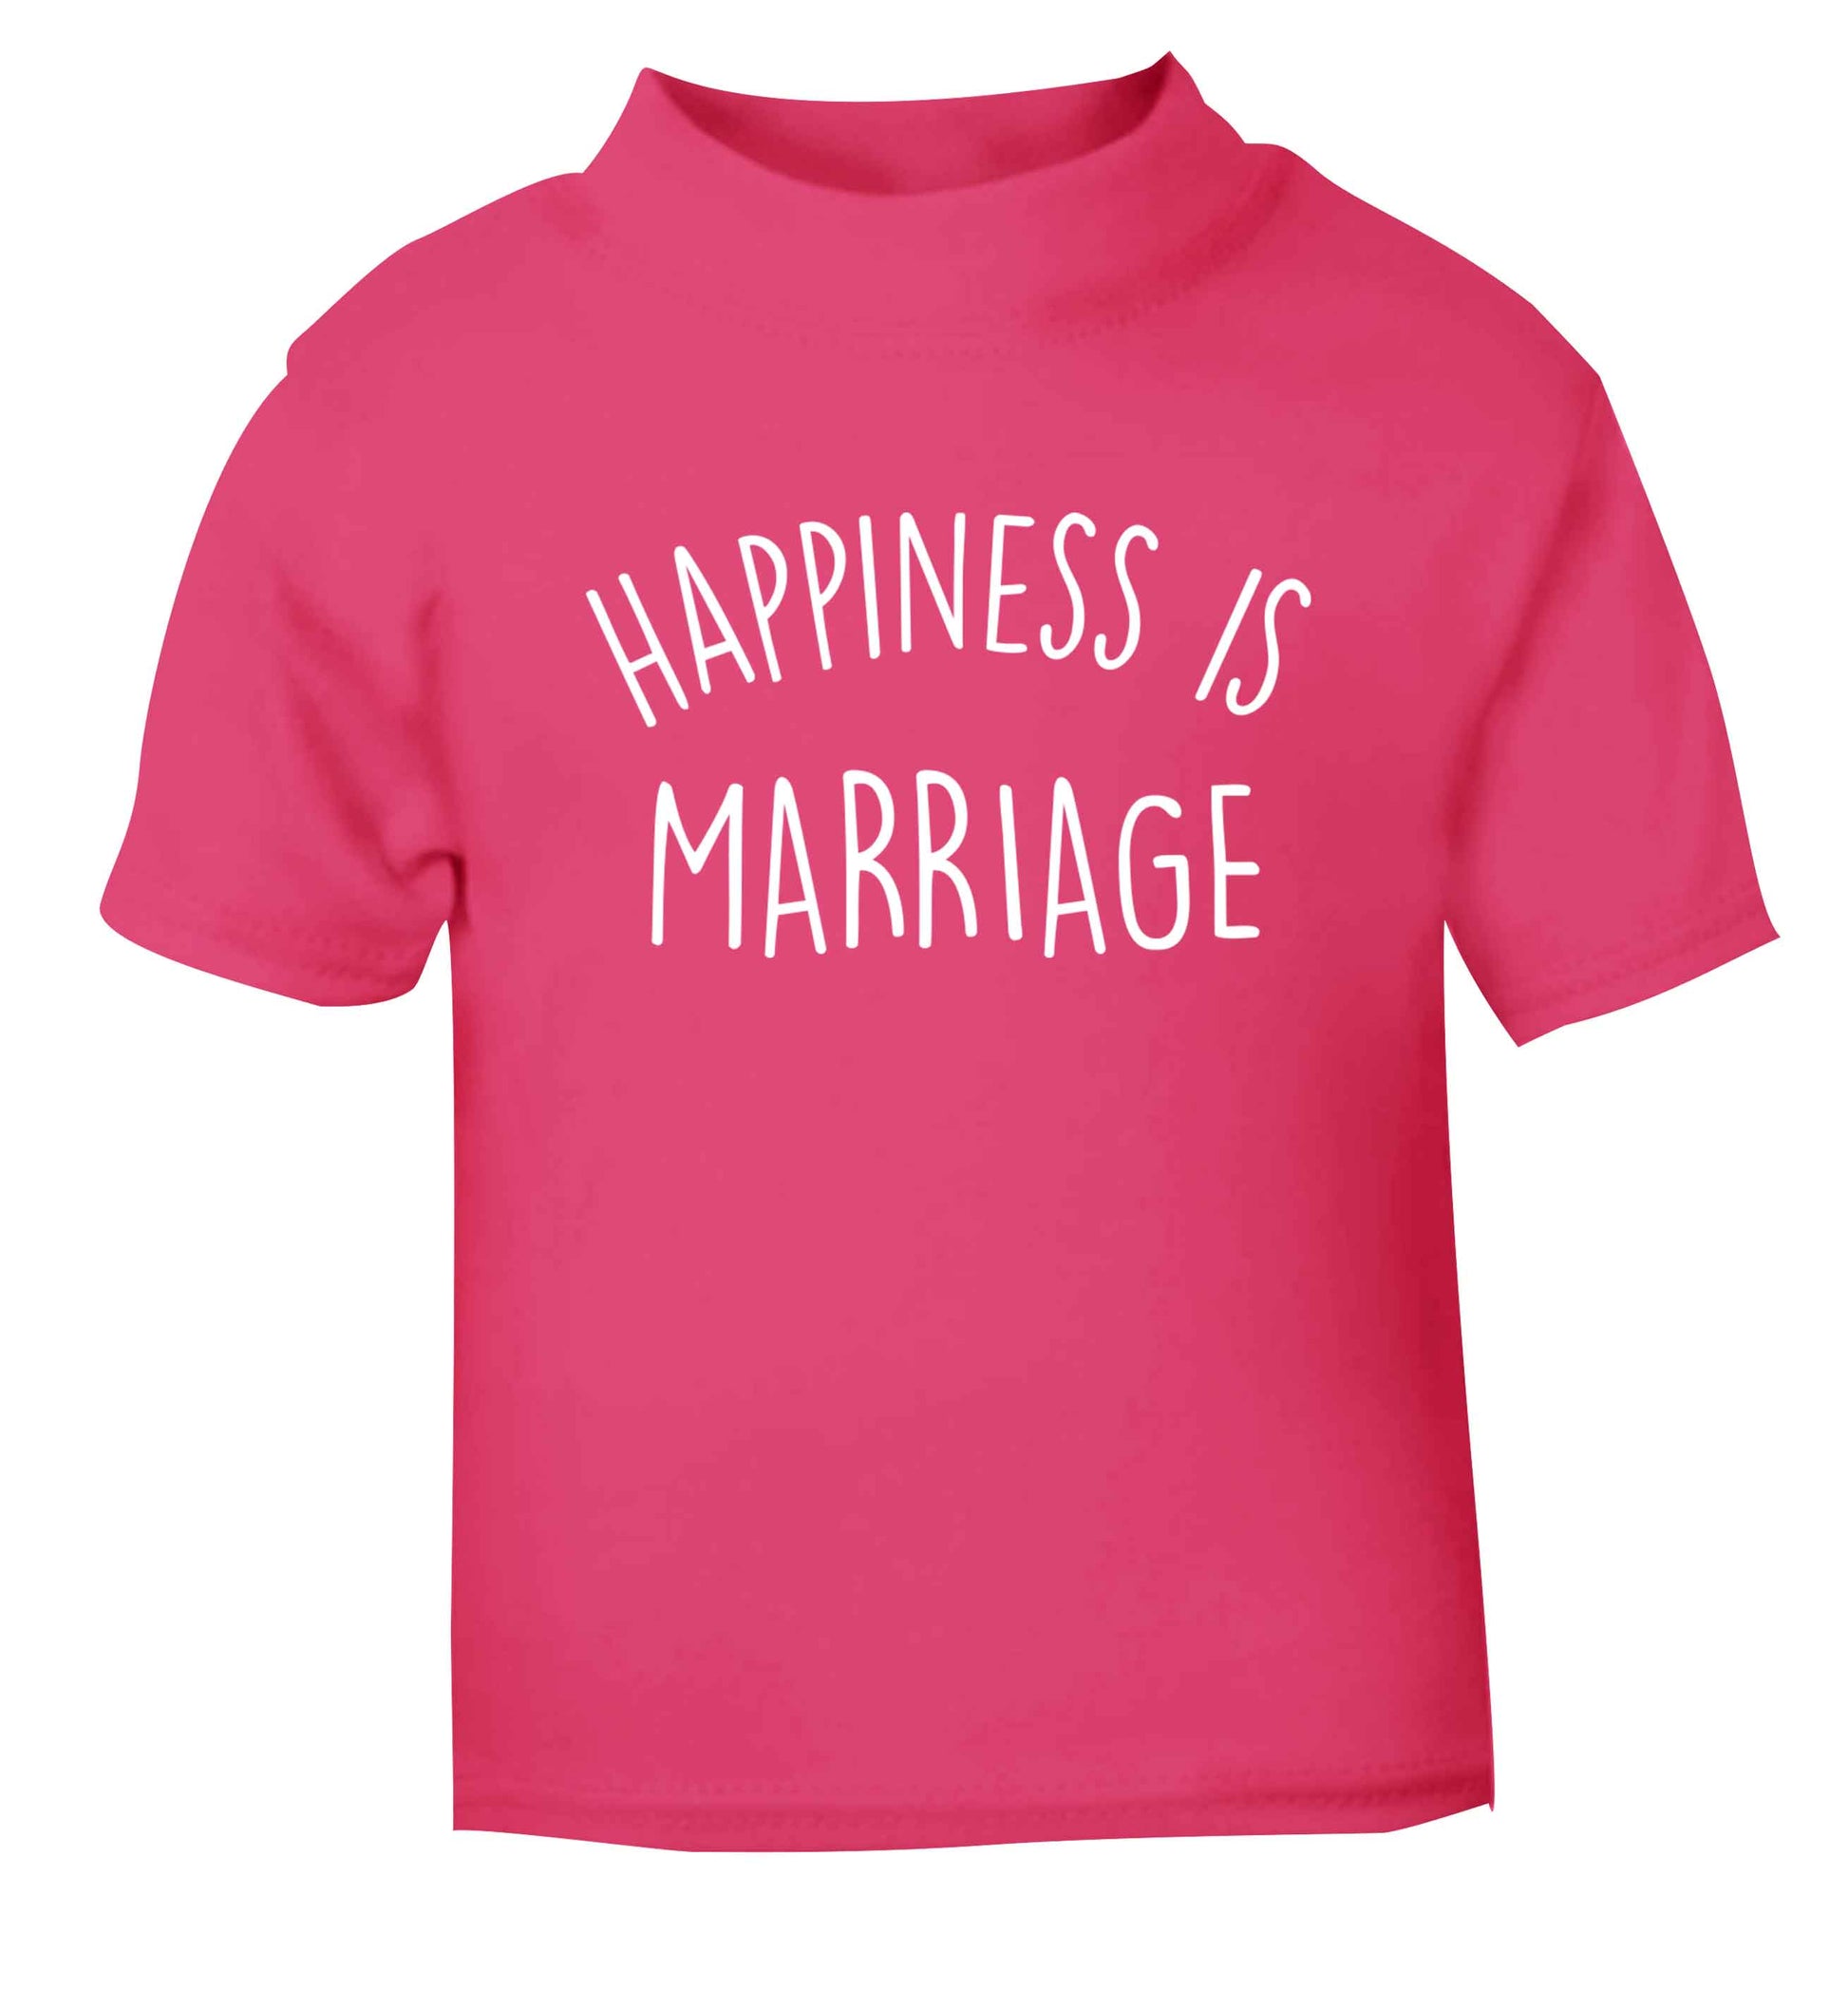 Happiness is wedding planning pink baby toddler Tshirt 2 Years